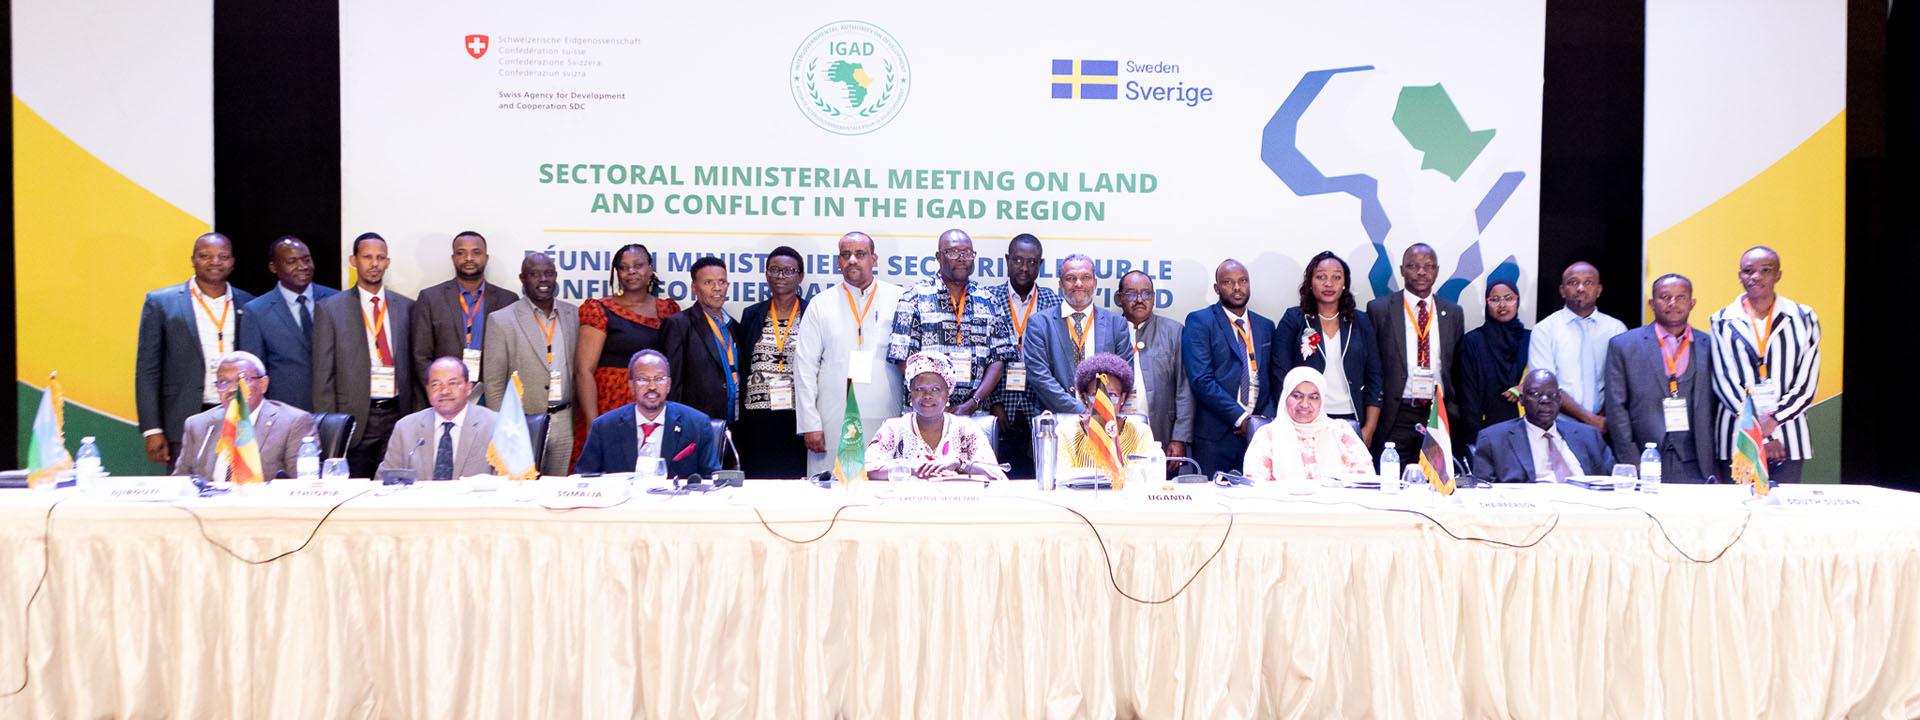 Communique of the Sectoral Minister’s Meeting on the Transformative Agenda on Land, Climate Change and Conflict Management in the IGAD Region